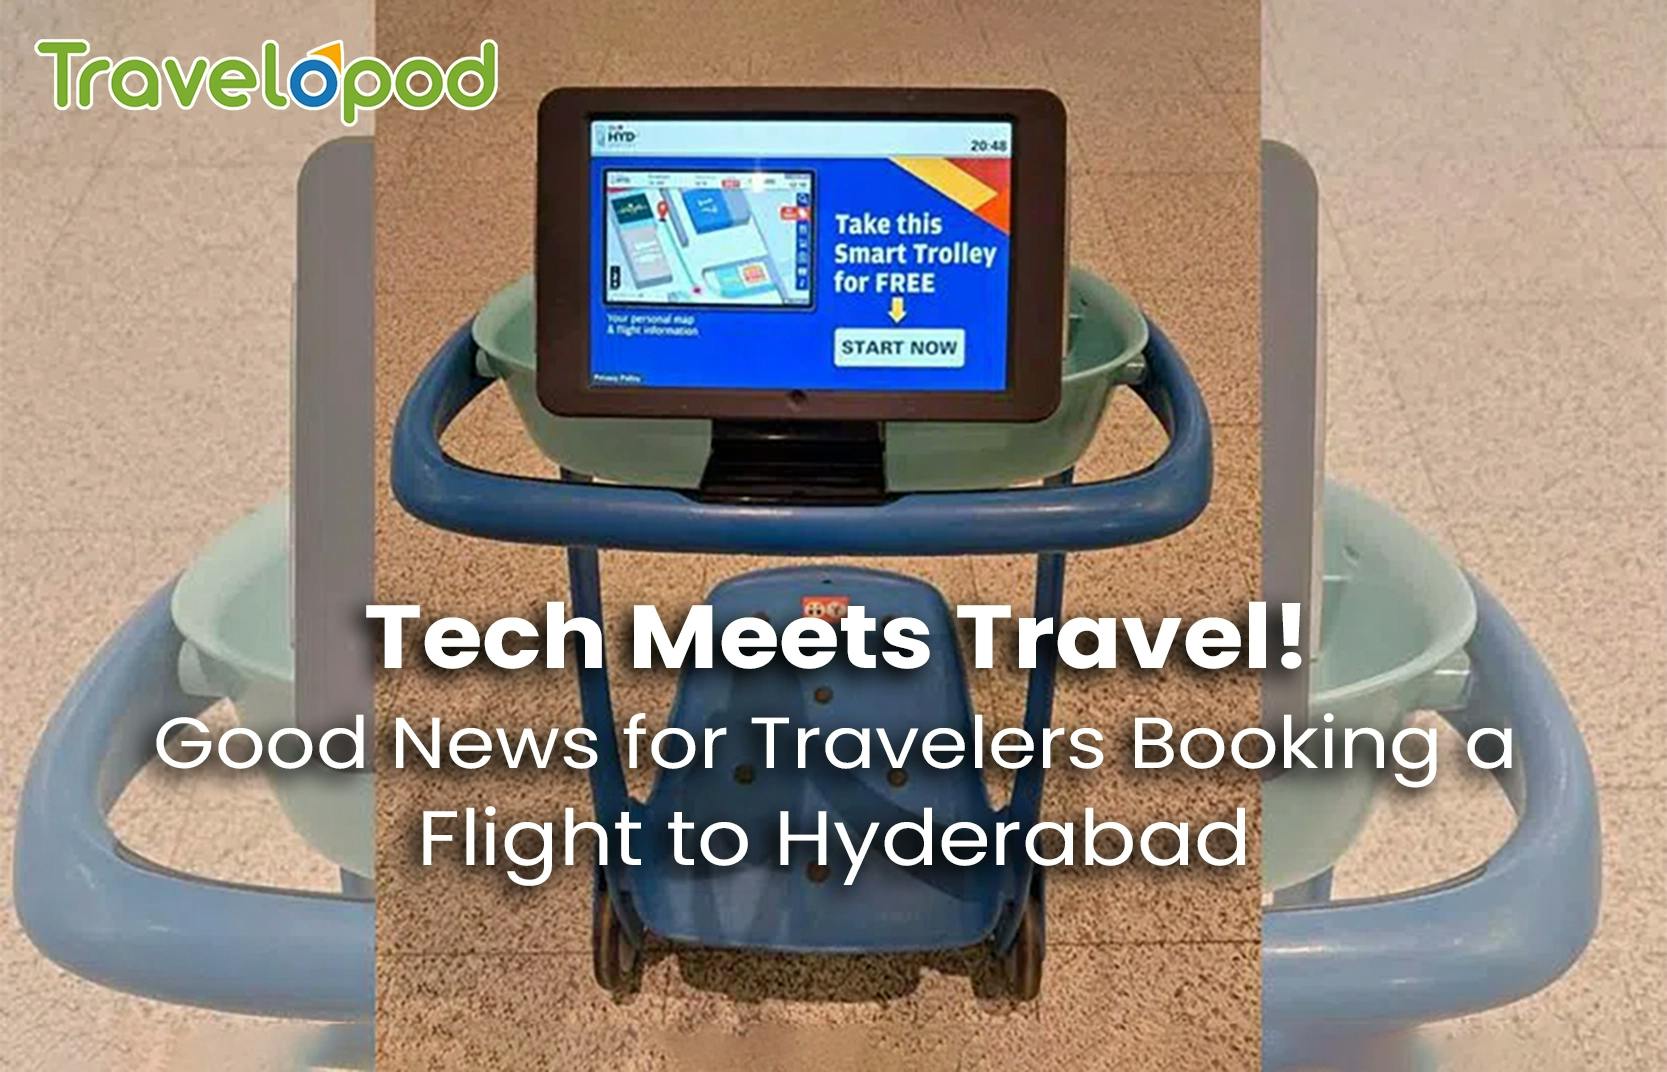 Hyderabad Airport's smart trolleys are changing the game. Compare flights to Hyderabad, scan your boarding pass, and let the trolleys do the rest! 